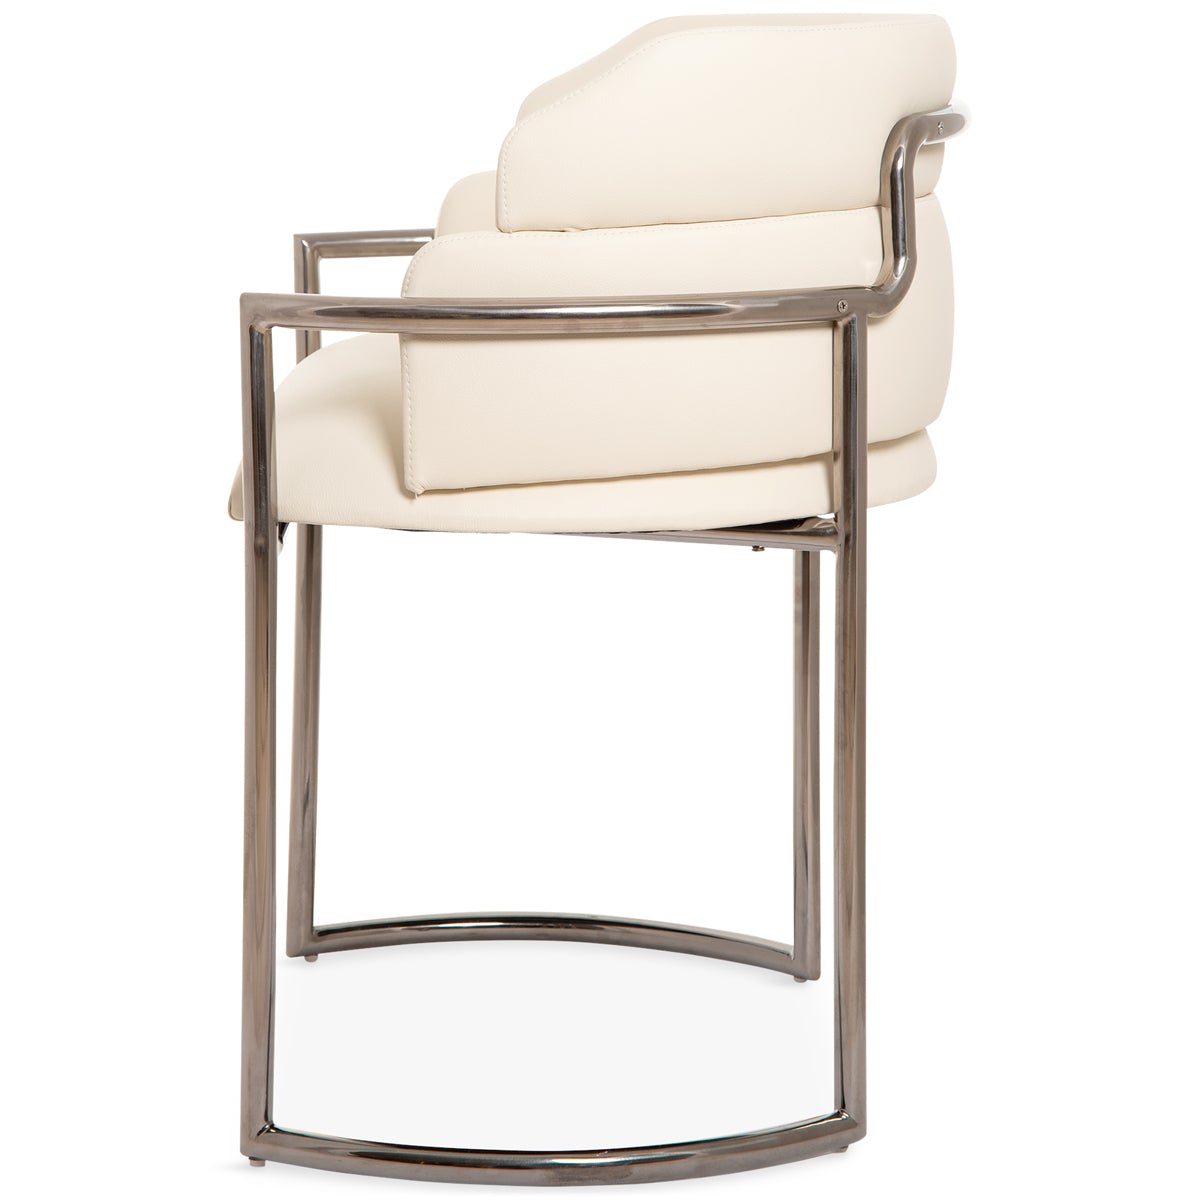 Buenos Aires Dining Chair in Blackened Chrome - ModShop1.com